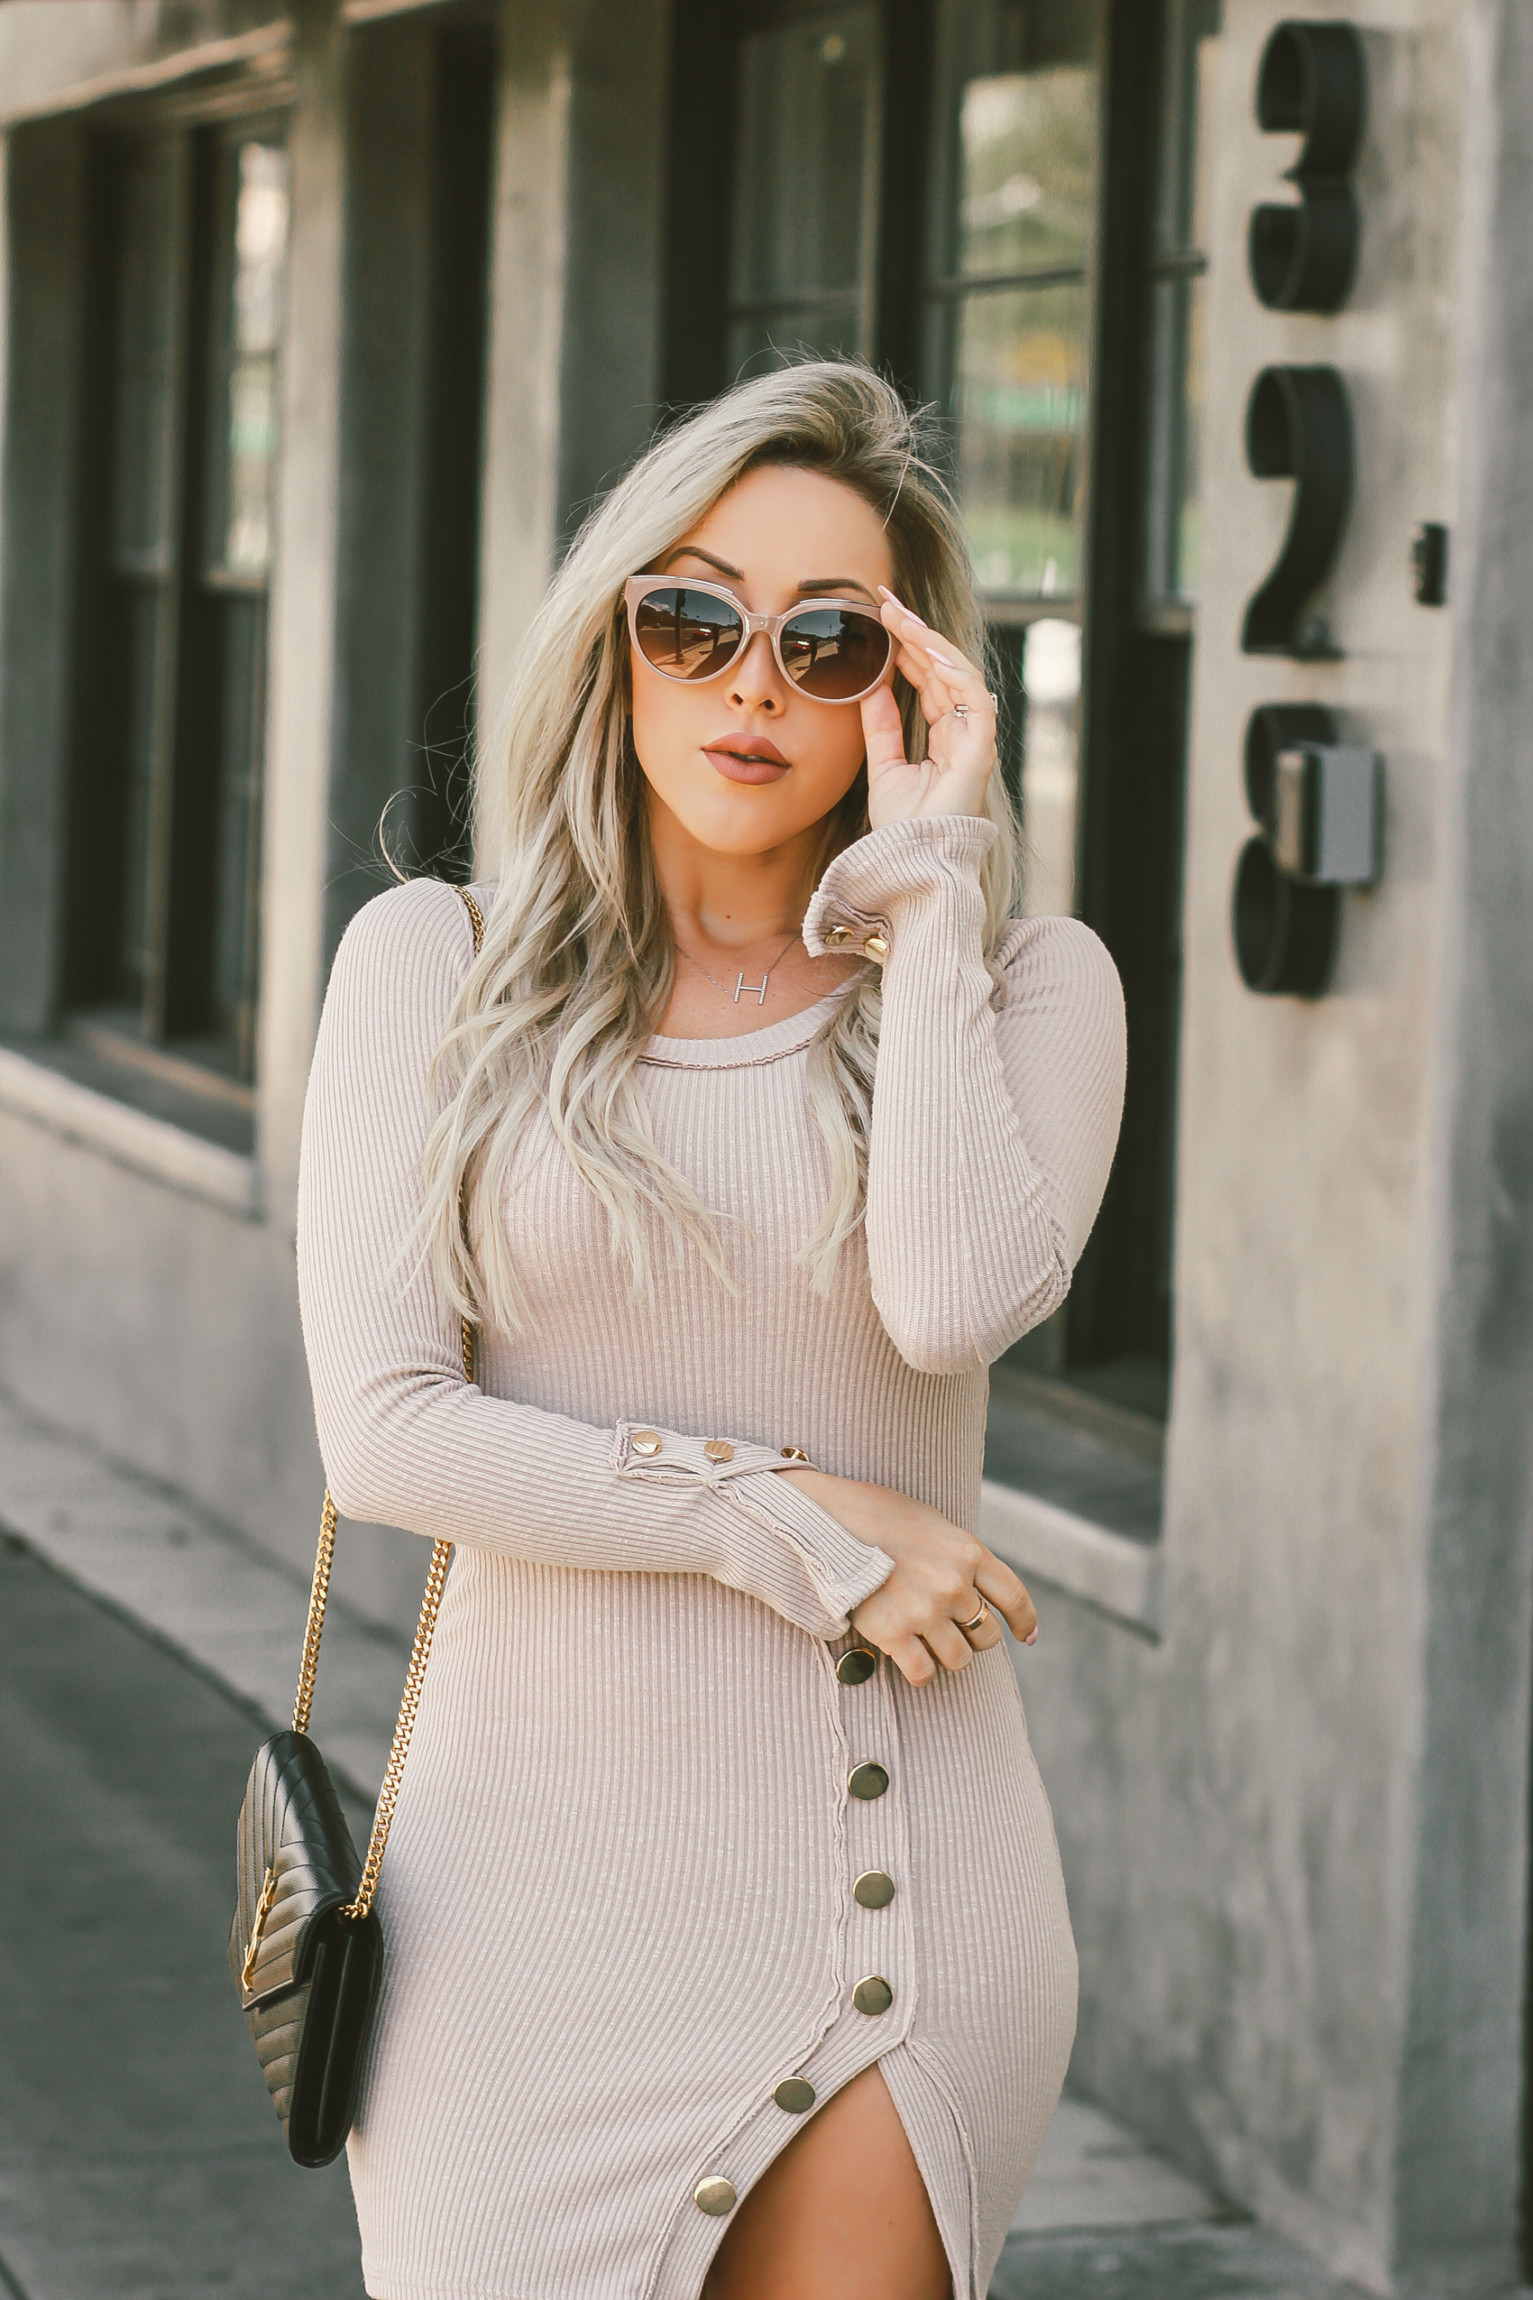 Beige/Neutral Sexy Button Sweater Dress | Balenciaga Sunglasses, Nude Louboutins, Black YSL | Blondie in the City by Hayley Larue